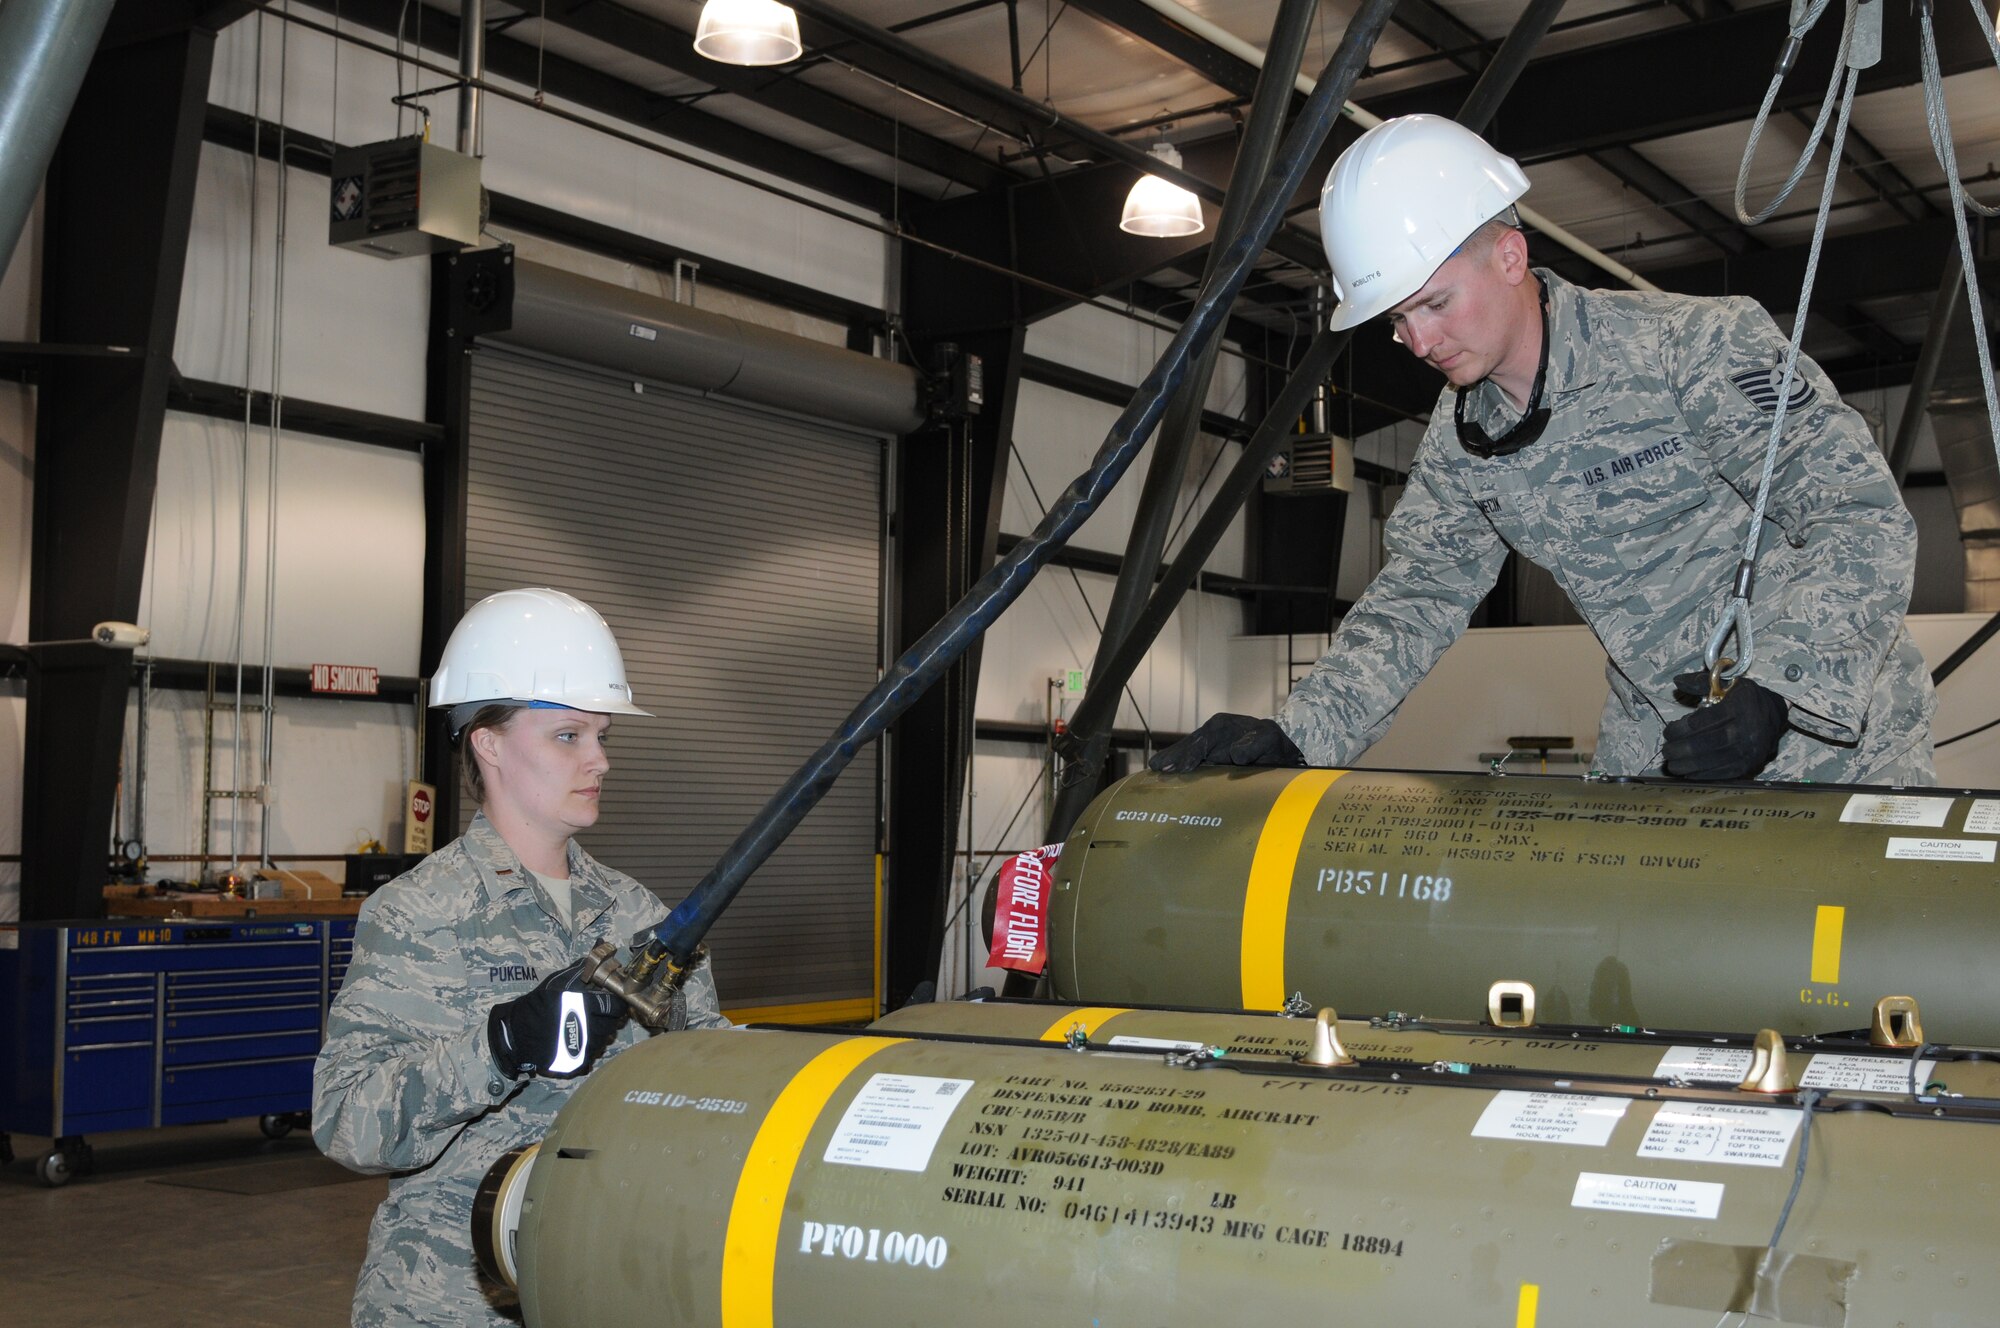 148th Fighter Wing Munition Airmen prepare weapons for Combat Hammer, May 1, 2015 while at Hill AFB, Utah.  Combat Hammer is a Weapons System Evaluation Program (WSEP) that evaluates the entire weapon process, from build-up to employment.  (U.S. Air National Guard photo by Master Sgt. Ralph Kapustka)